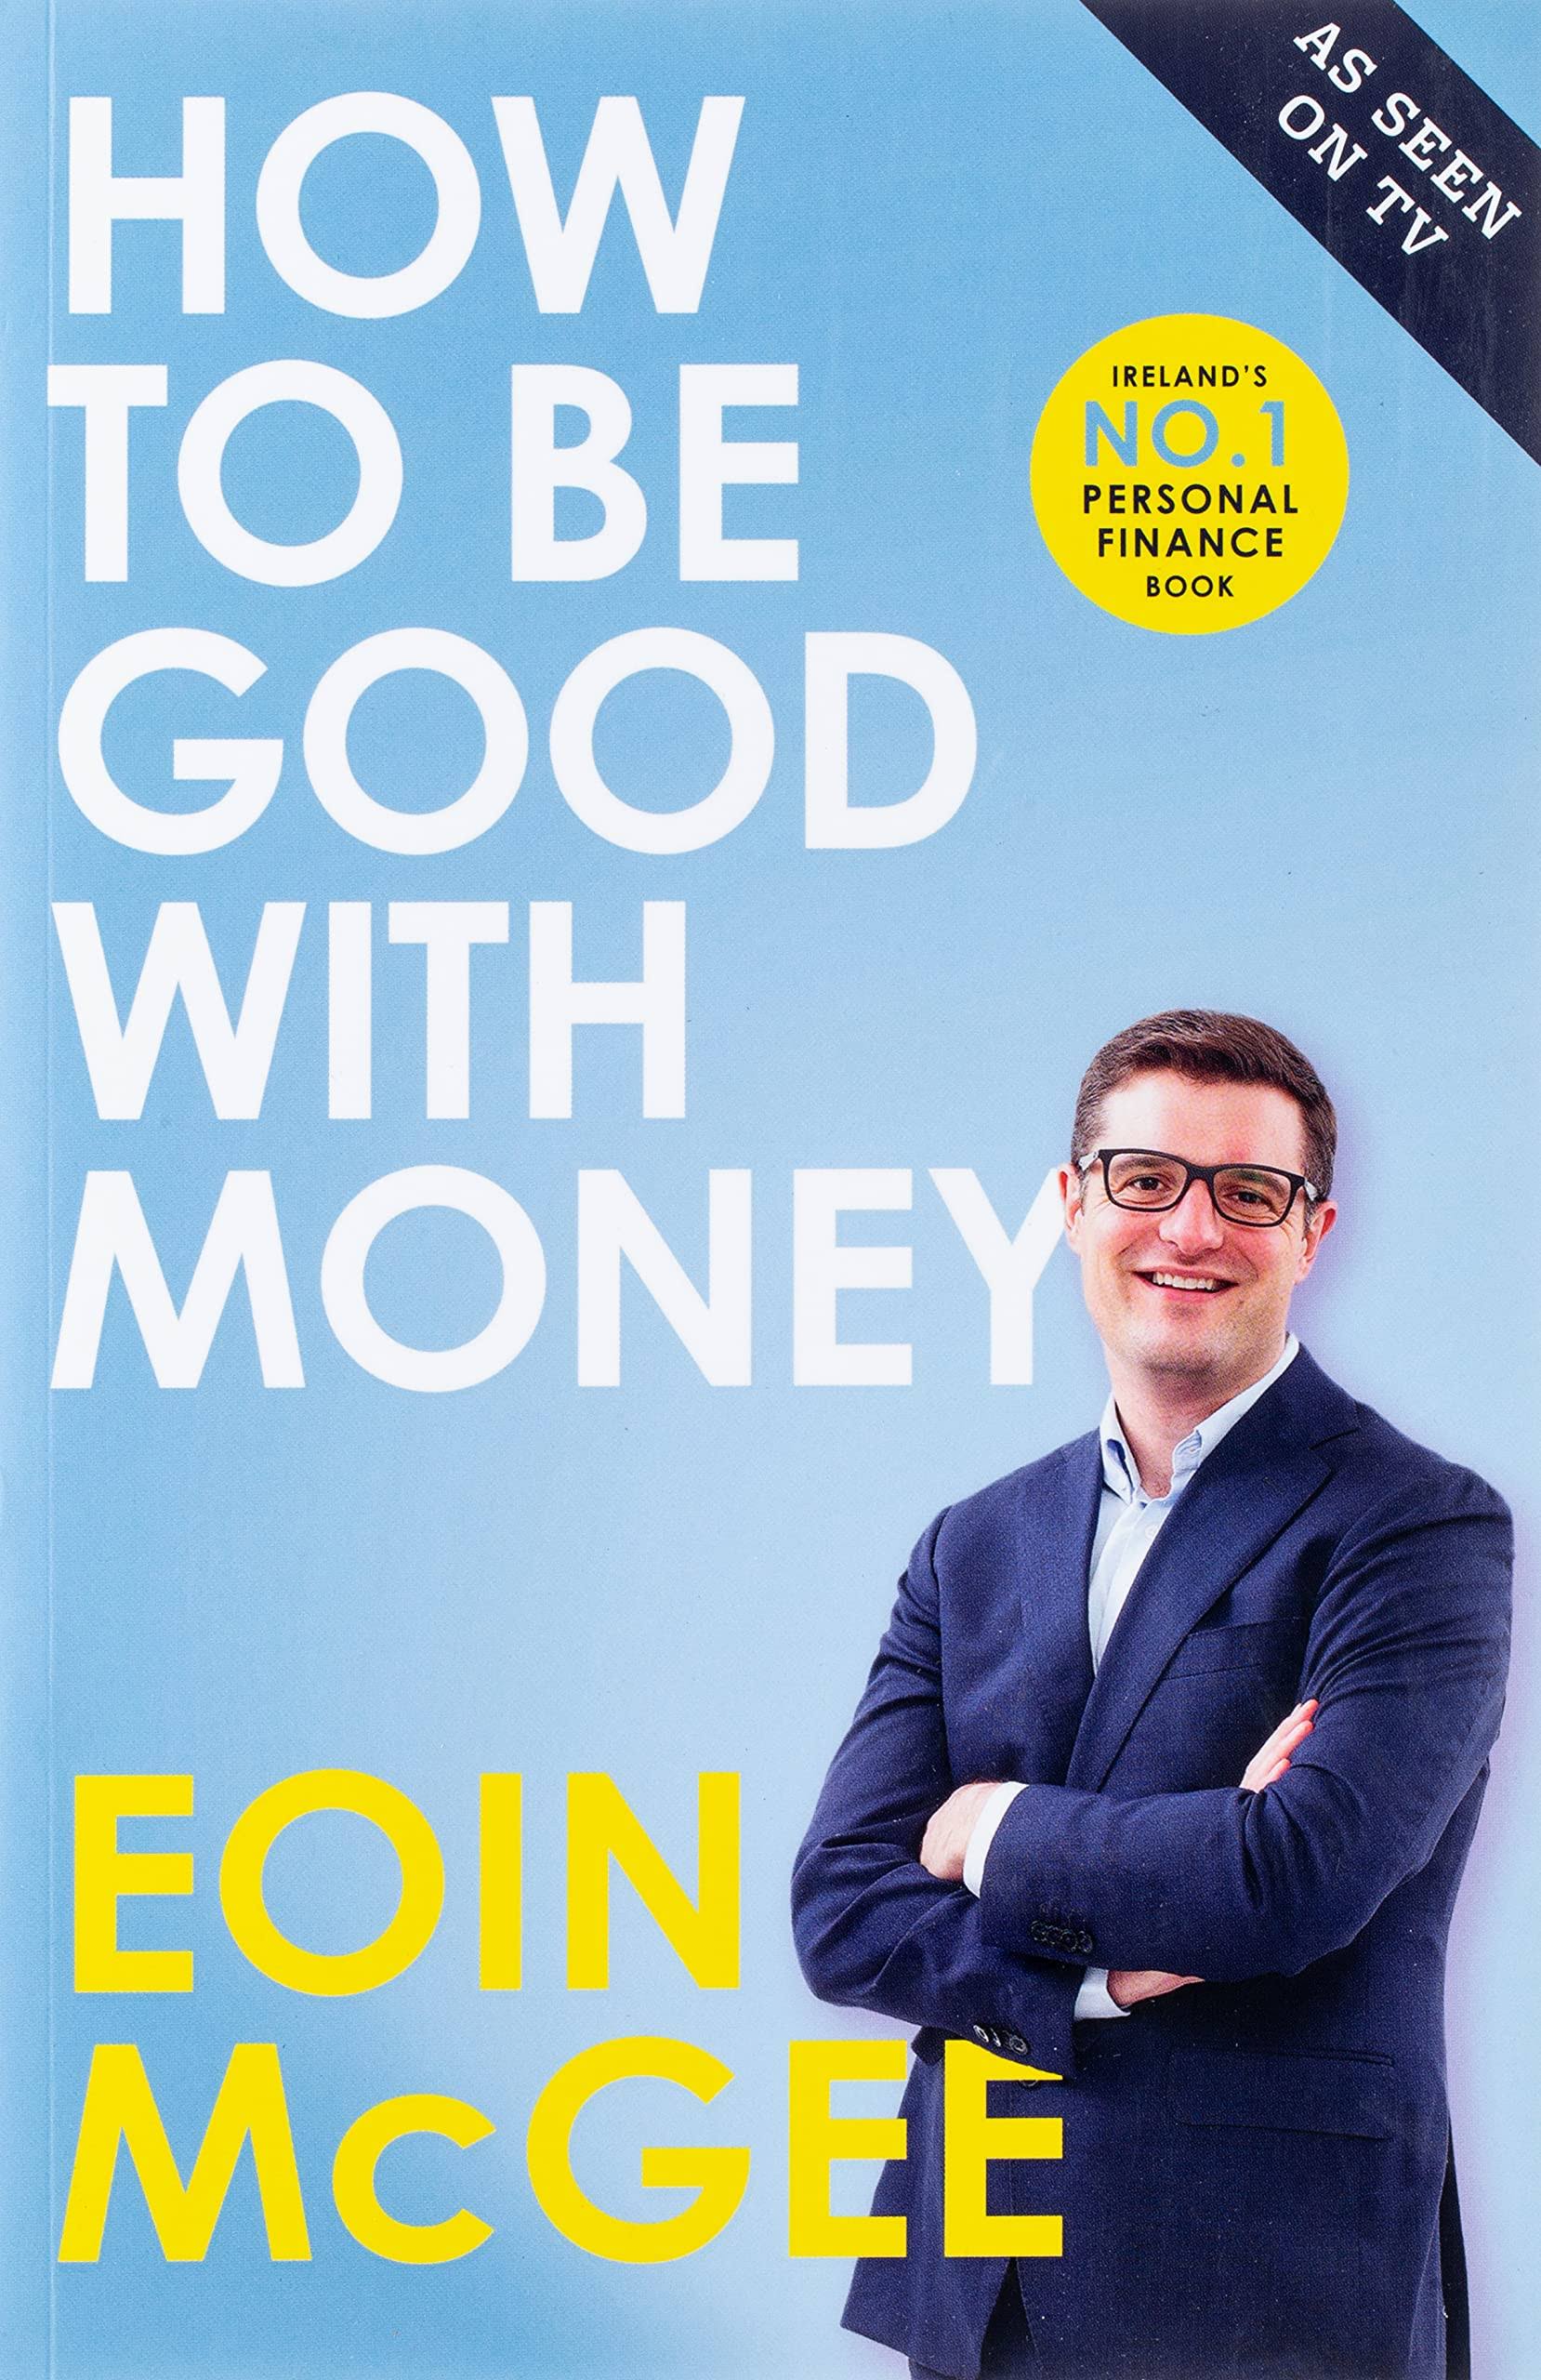 How to Be Good With Money [Book]